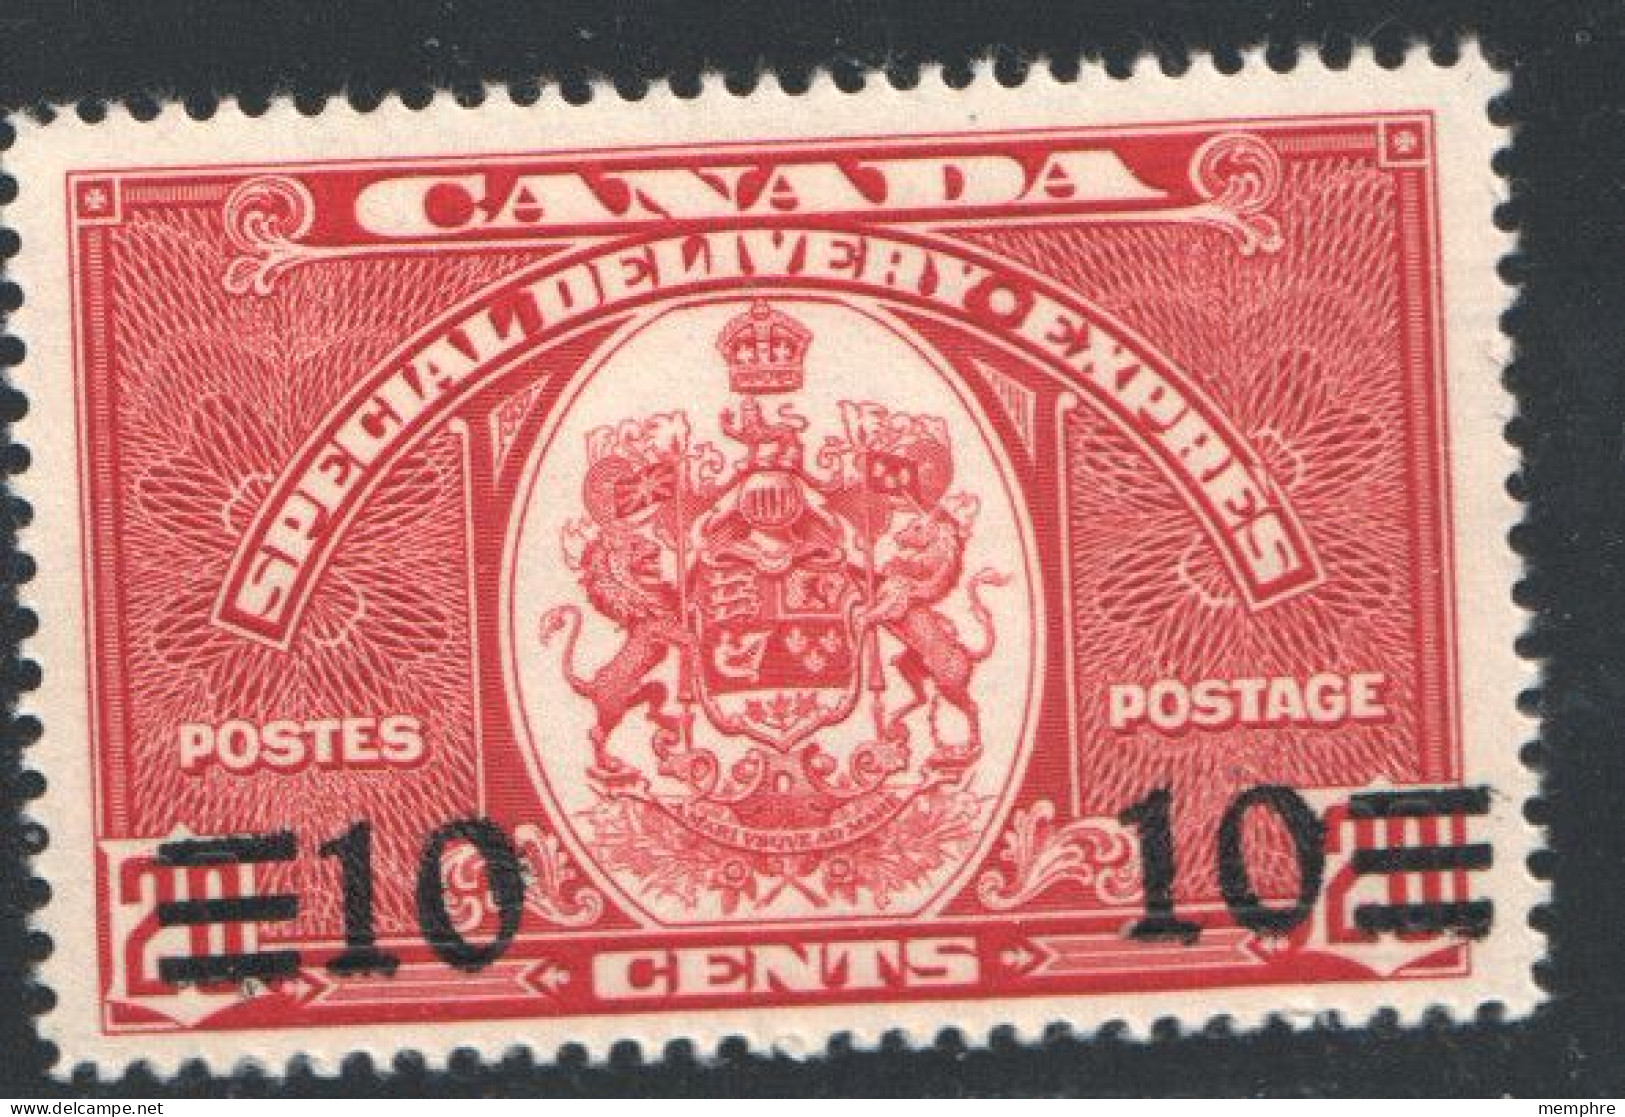 1938  Special Delivery  Overprinted 10 Cents   Sc E9 MNH ** - Correo Urgente